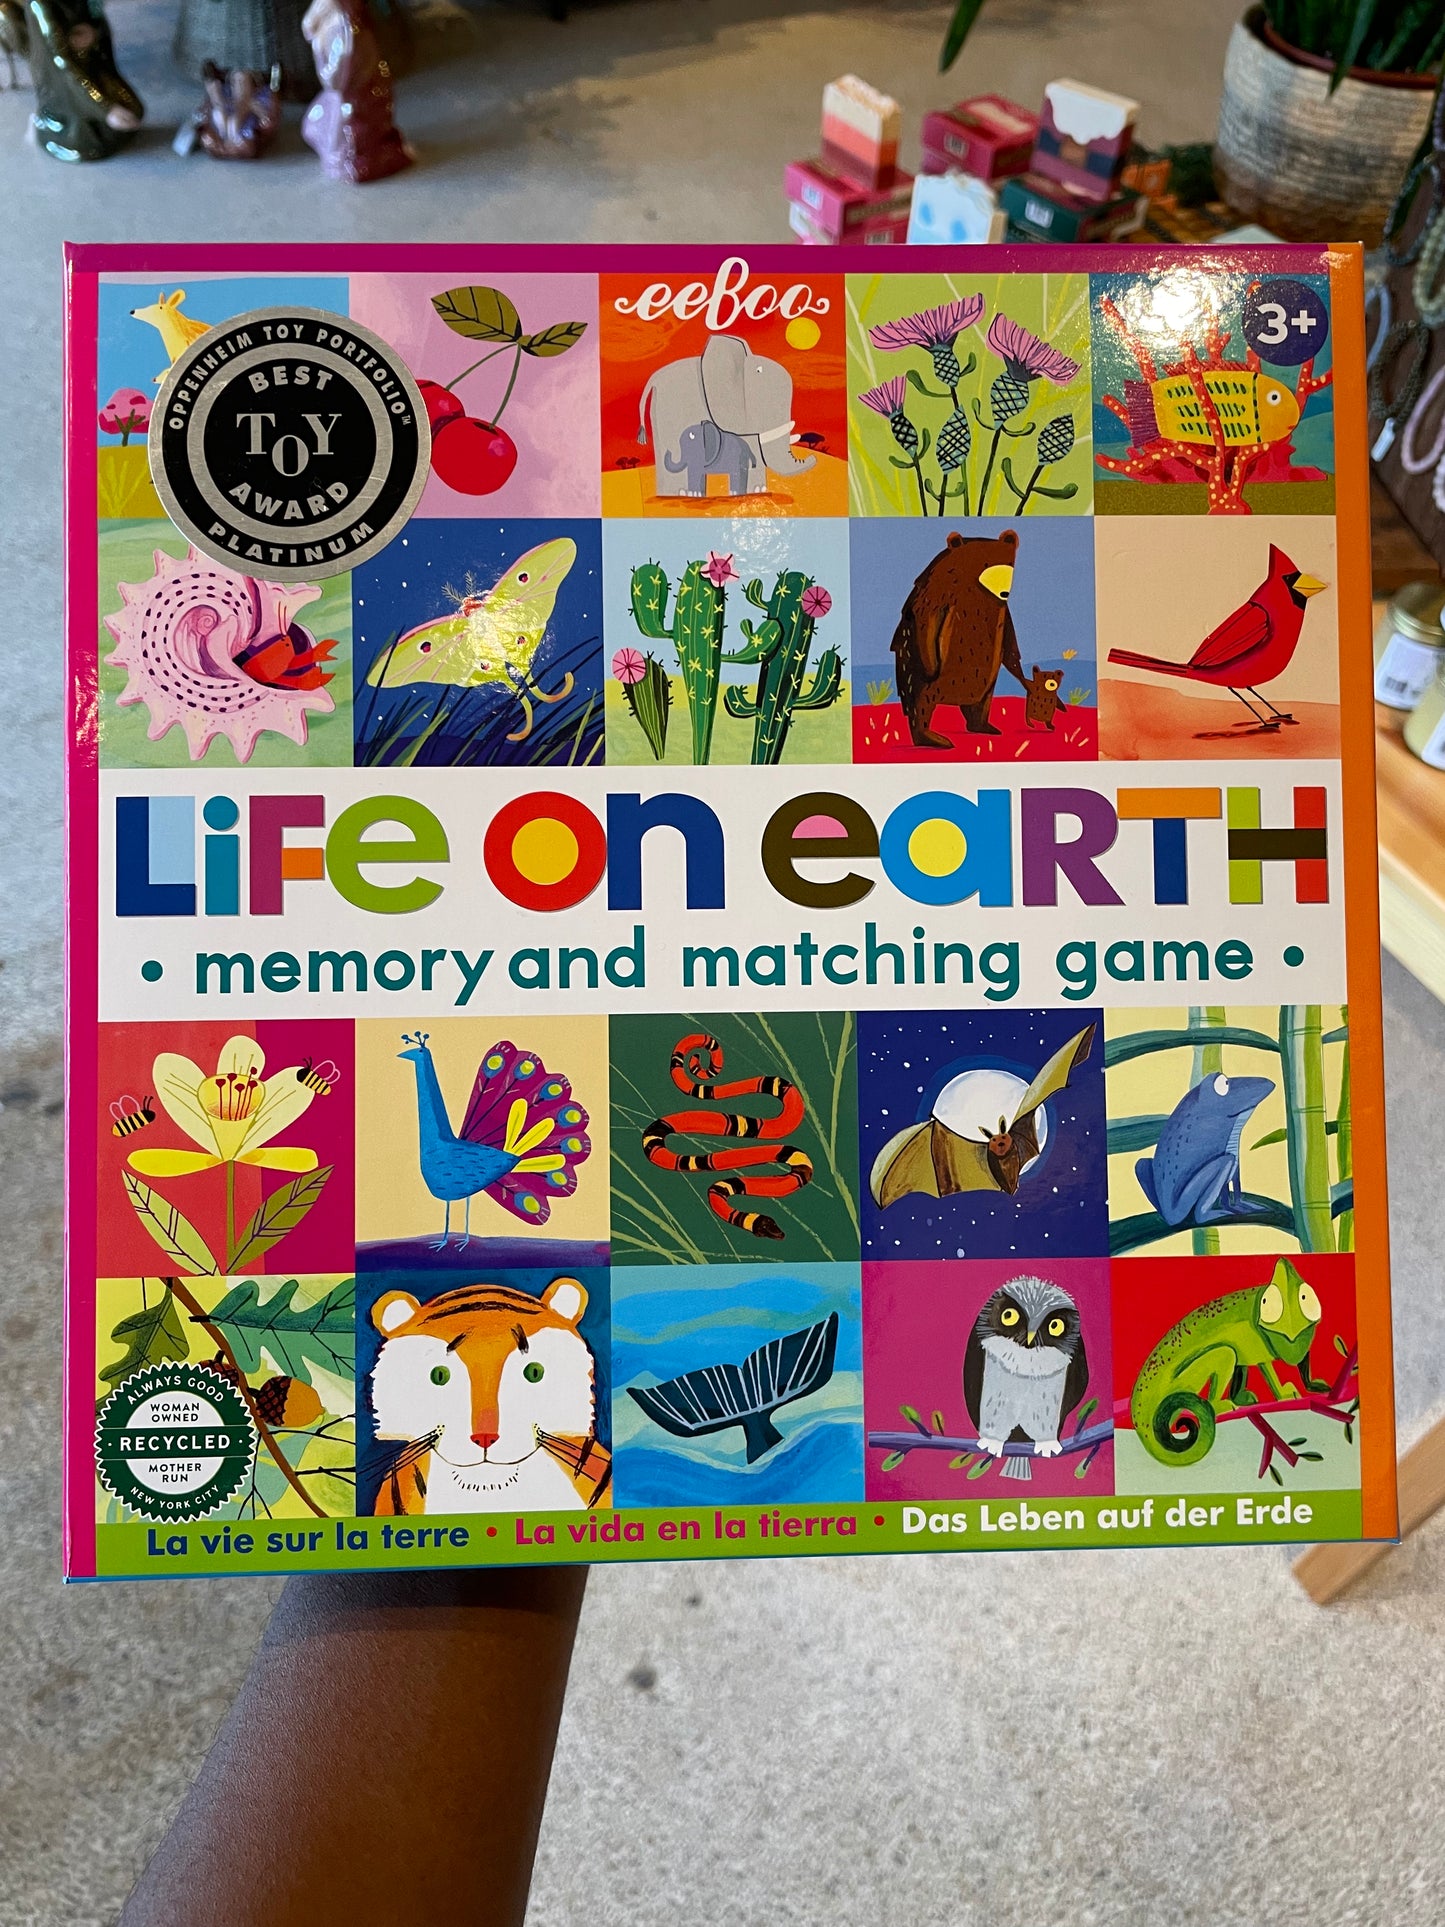 Eeboo Life on Earth Memory and Matching Game